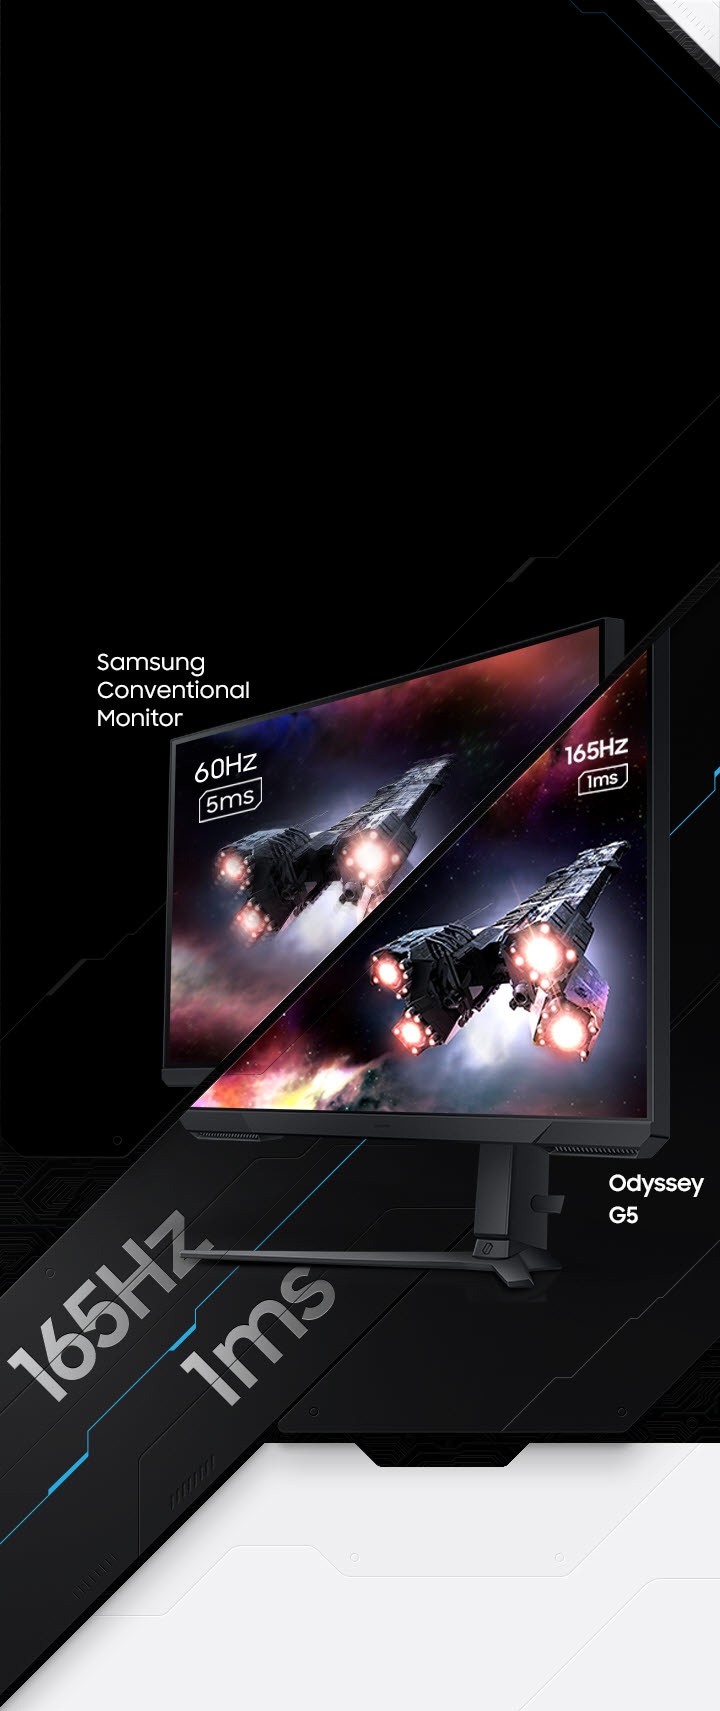 Samsung Odyssey G5 - A Great Value Gaming Monitor 